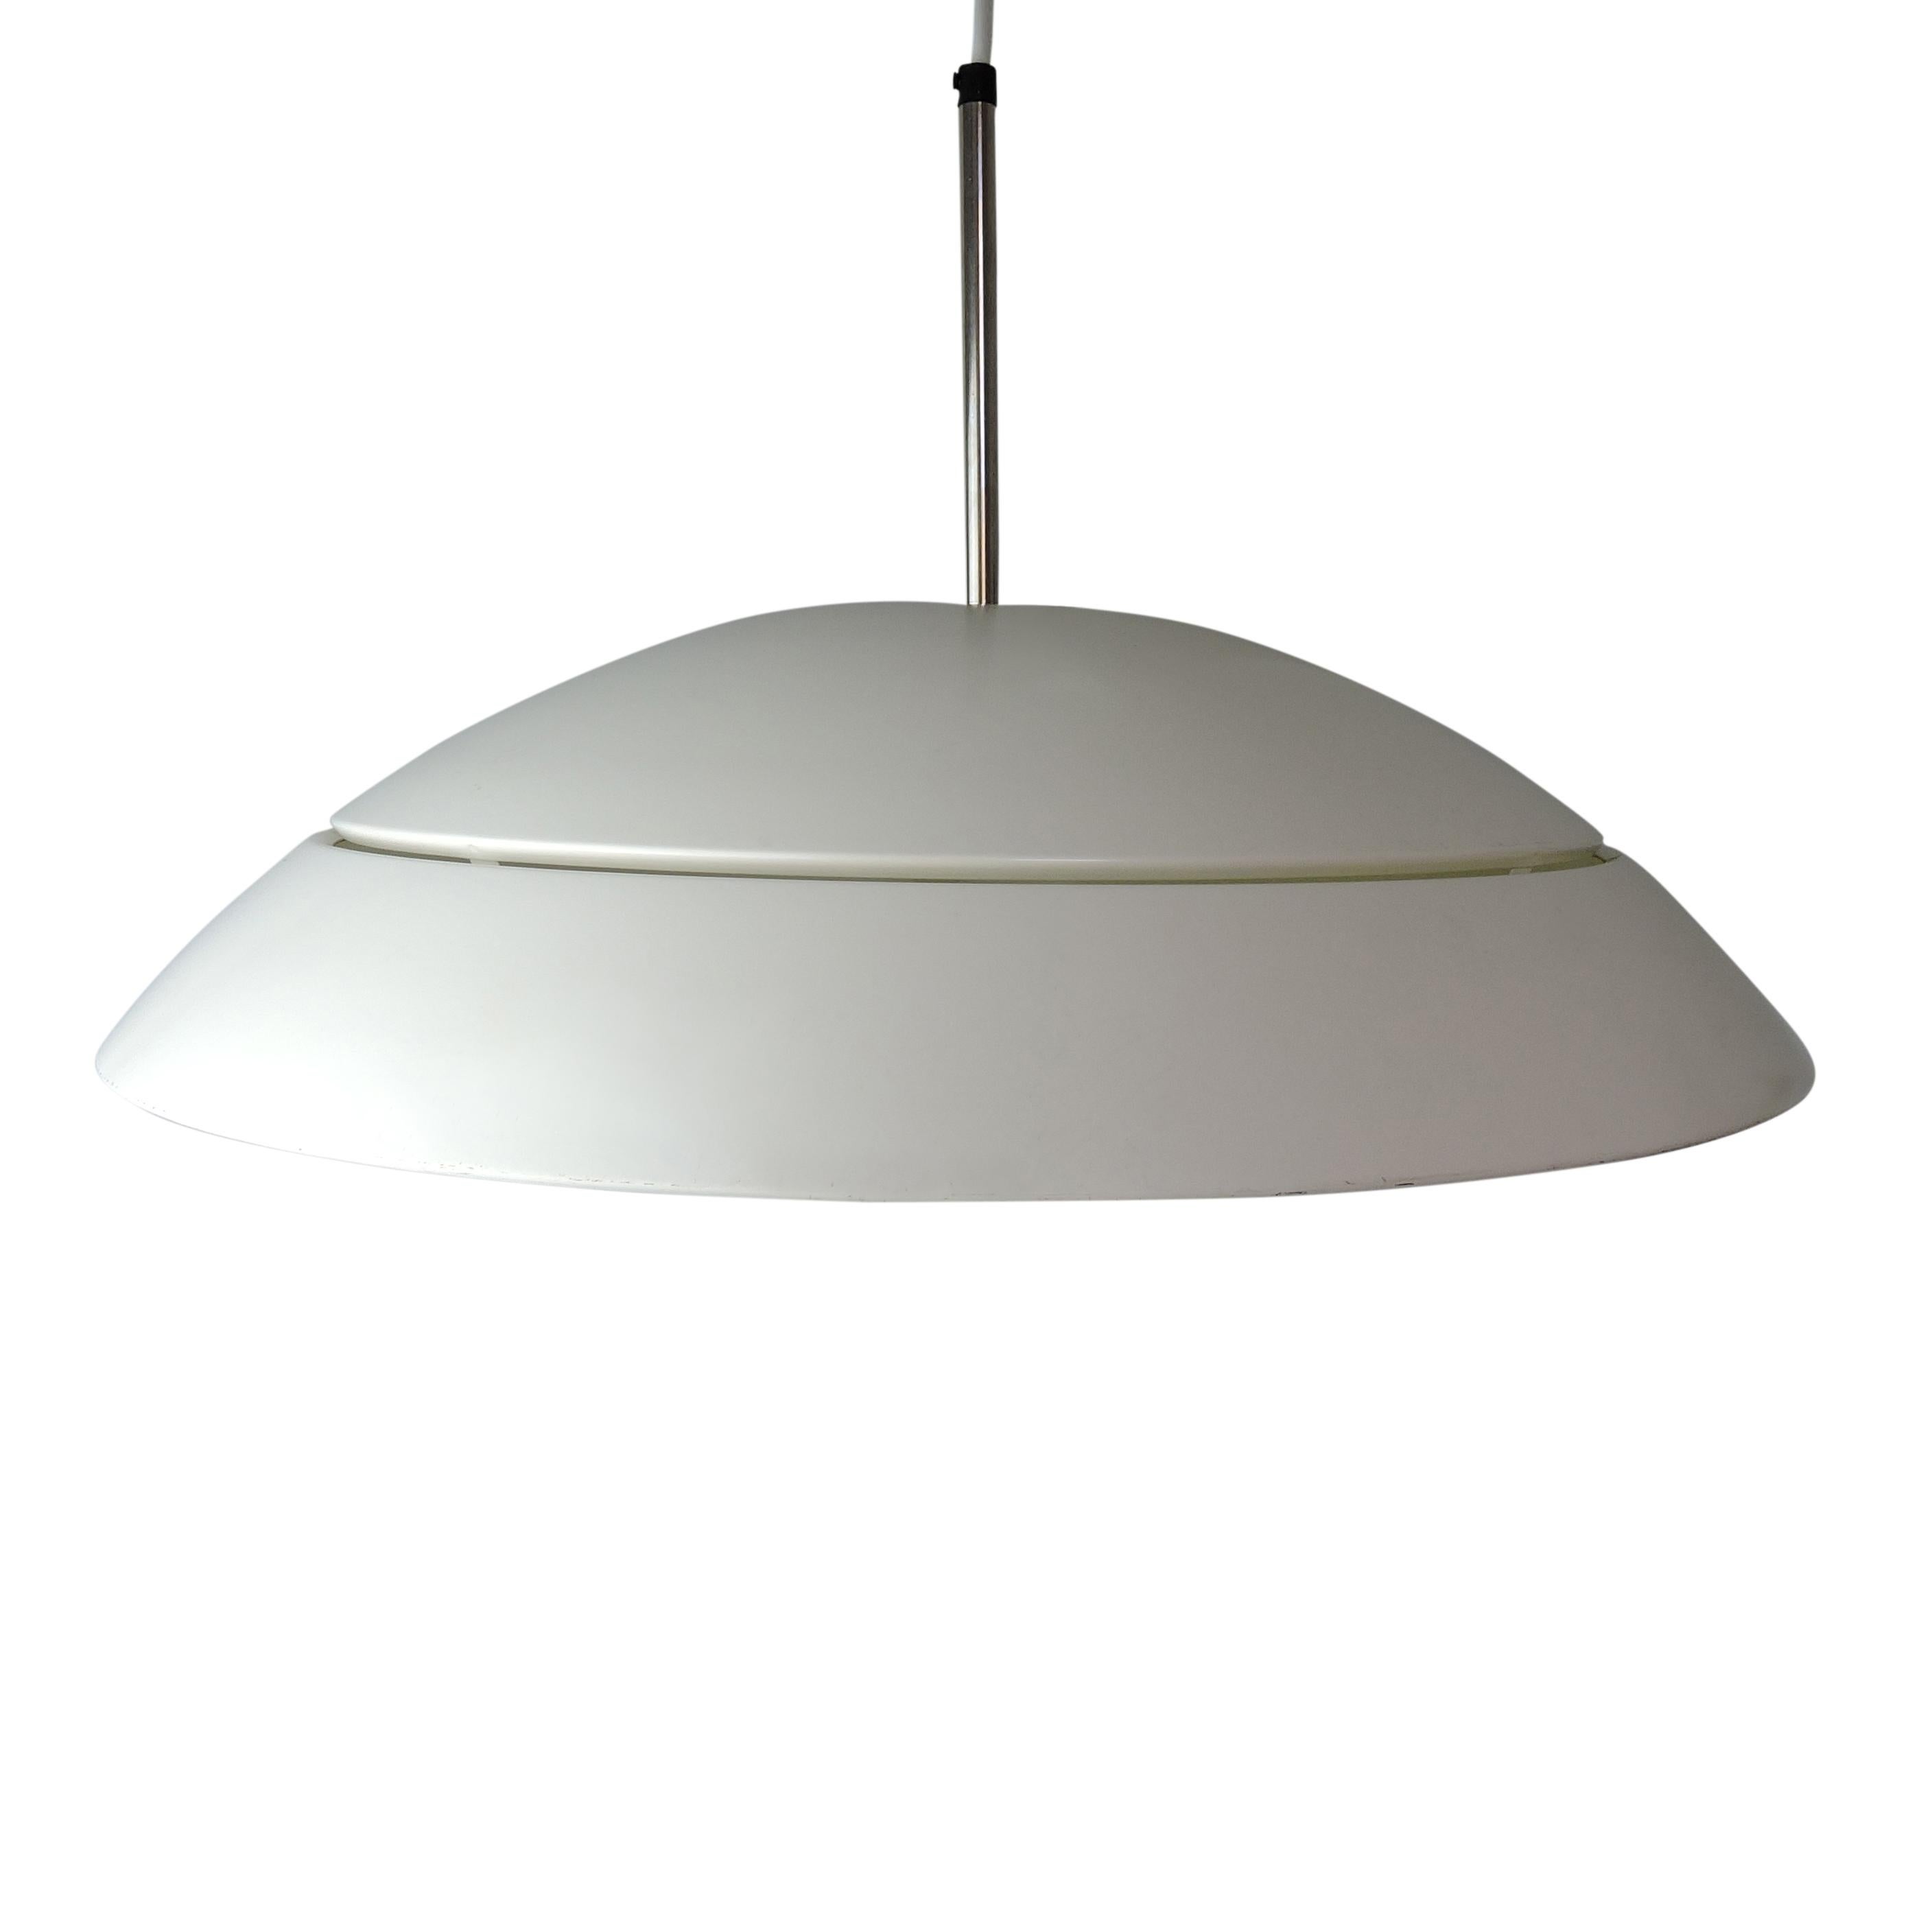 This Danish dome-shaped pendant light extended on a metal rod features a white exterior and a glass diffuser.